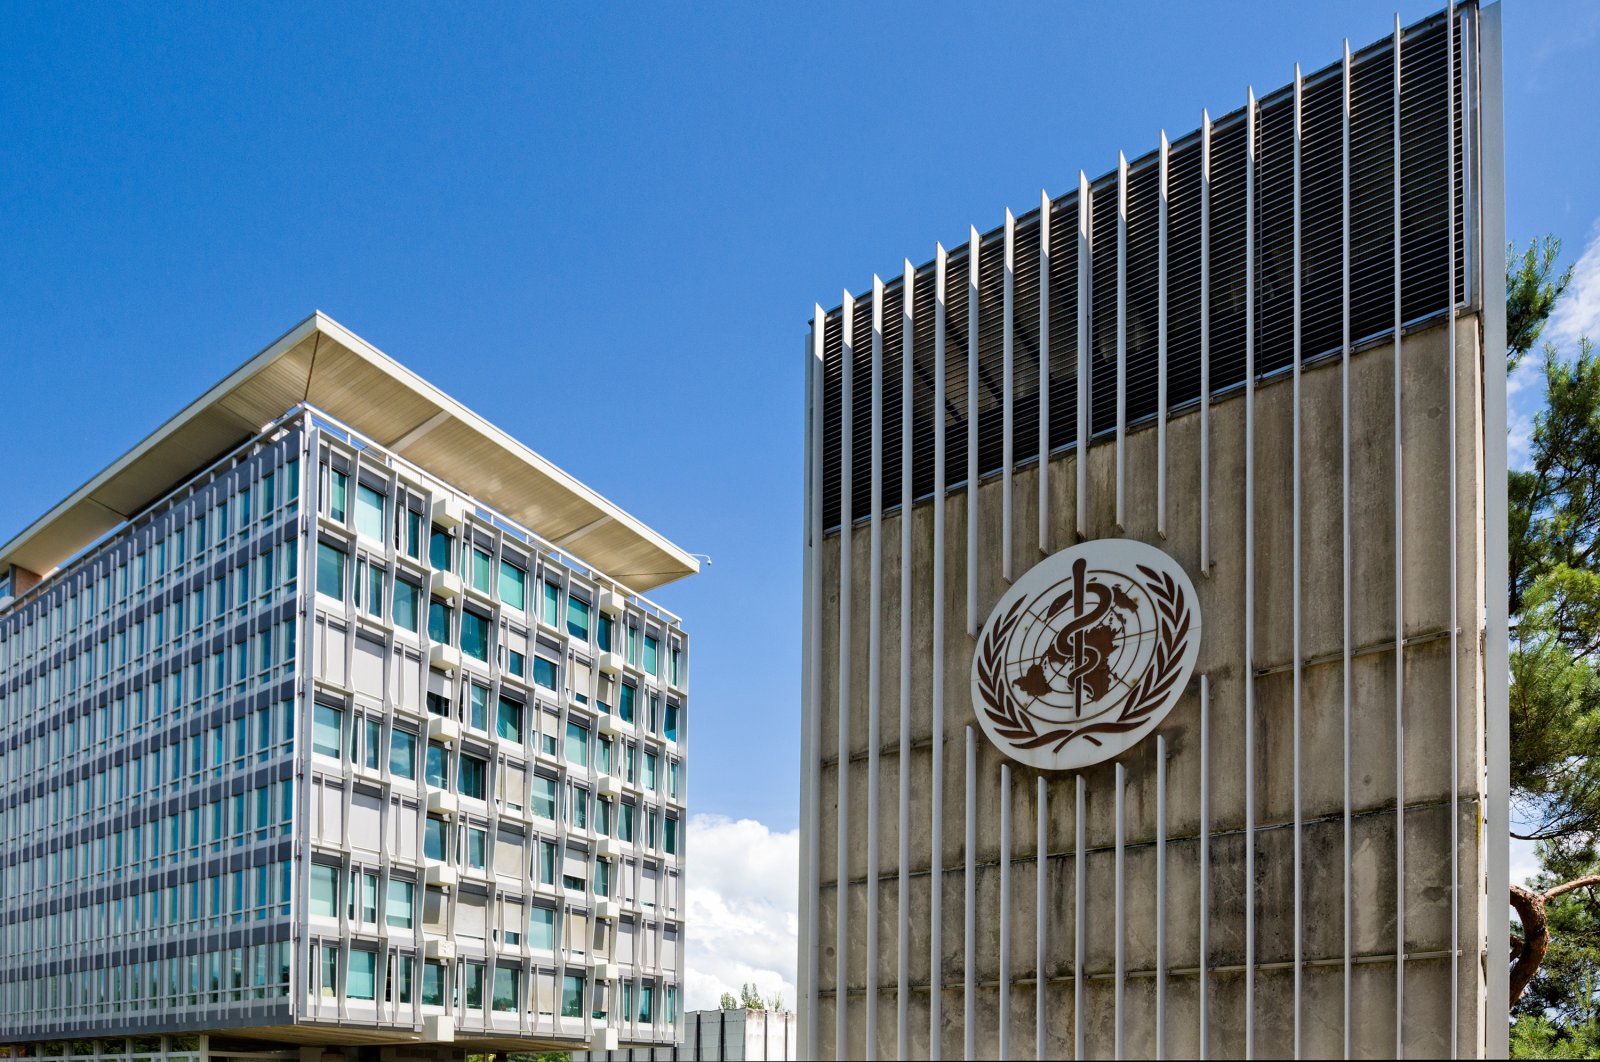 The World Health Organization (WHO) headquarters situated on the outskirts of Geneva, Switzerland, June 6, 2018. (Shutterstock Photo)